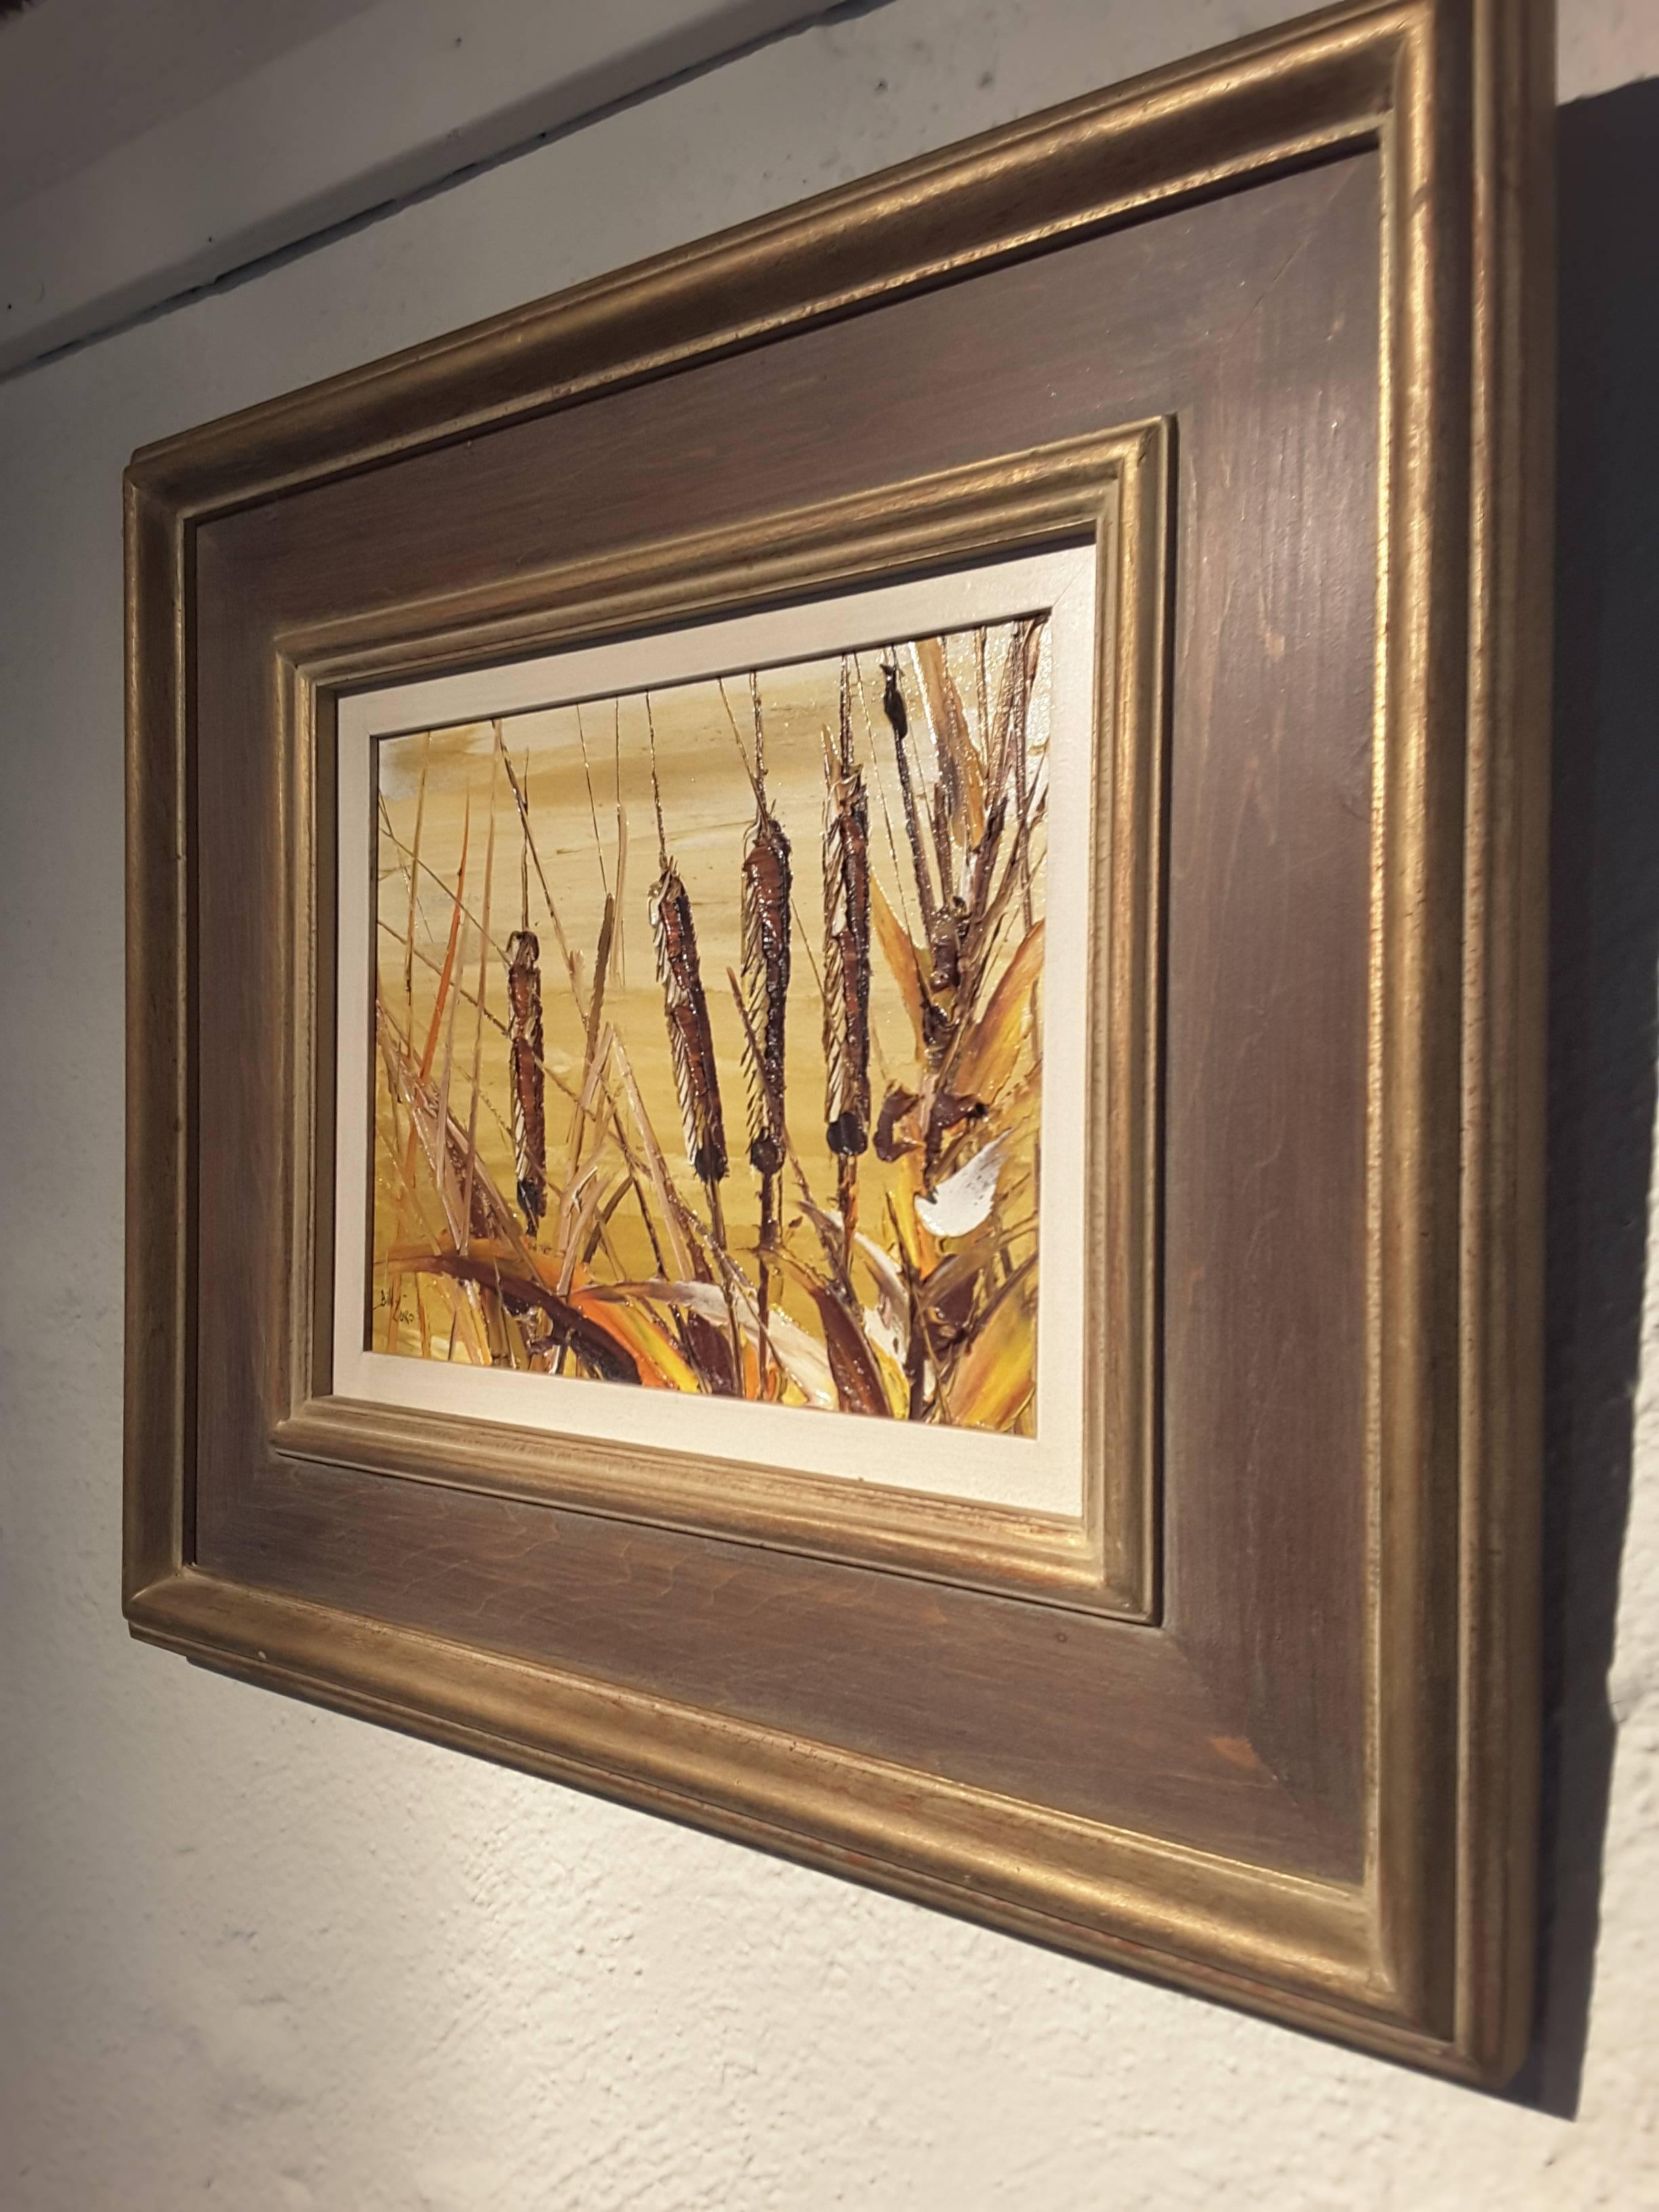 Bill Zuro Acrylic on Panel, Titled Cat Tails, Canadian Artist In Good Condition For Sale In Ottawa, Ontario